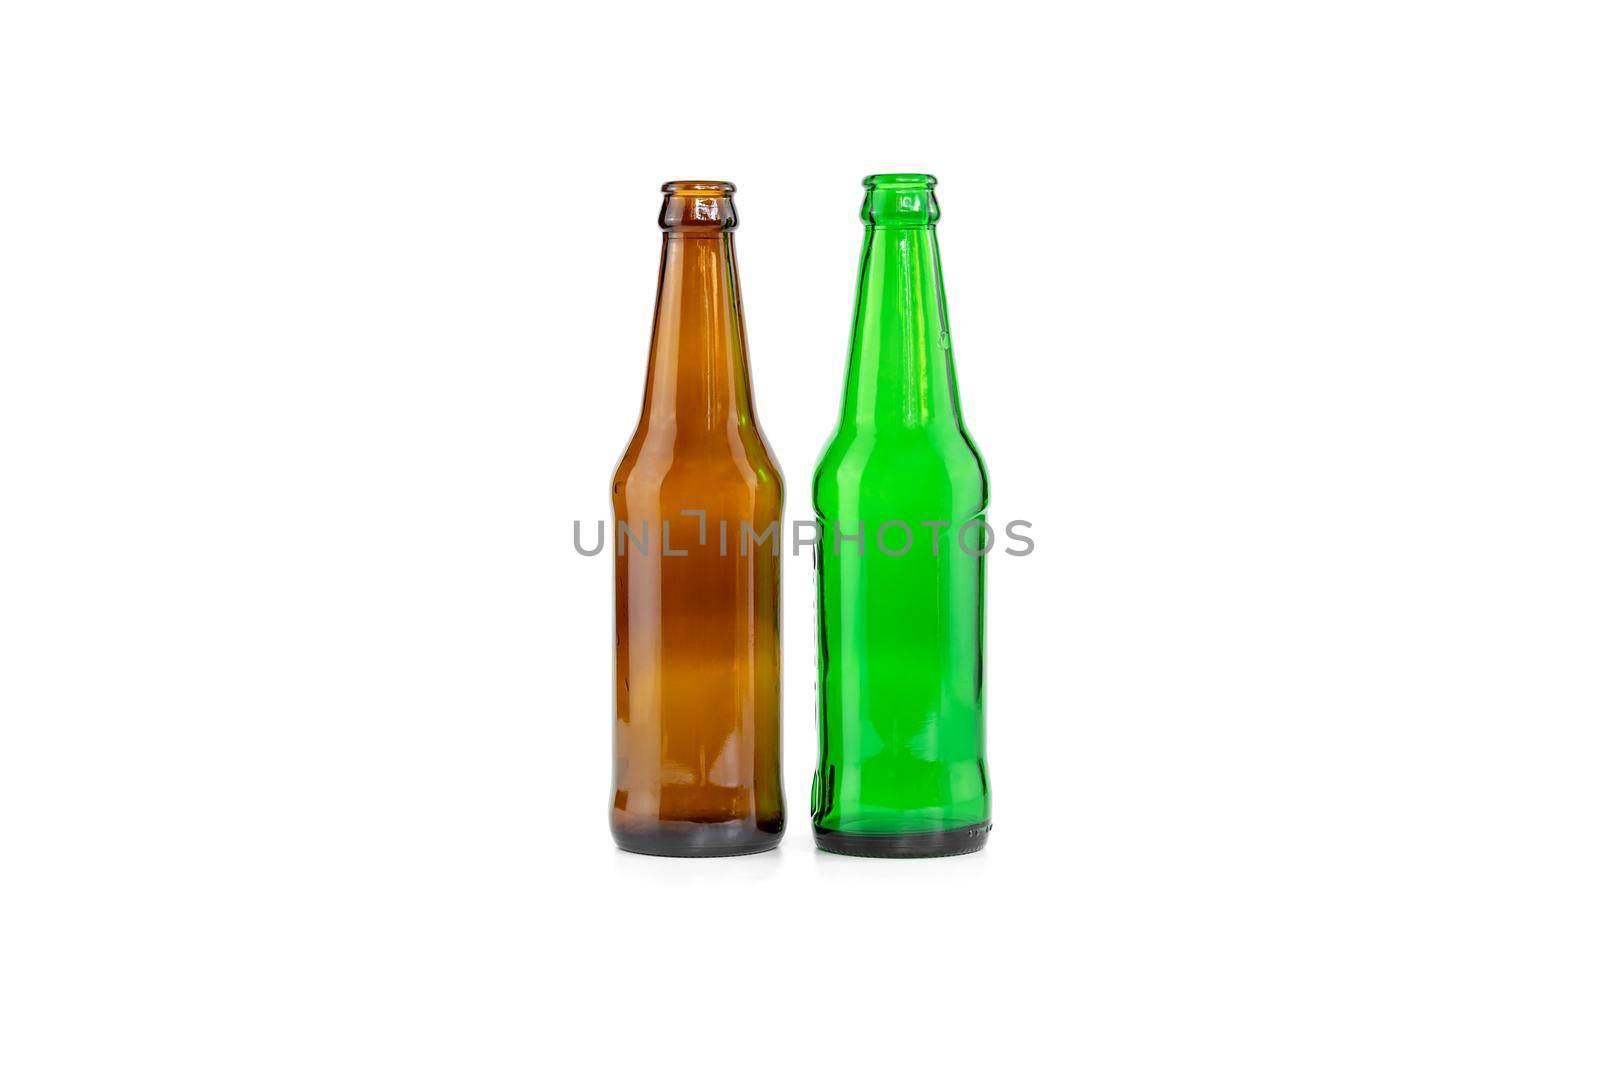 Empty brown and green beers bottles isolated on white background by wattanaphob